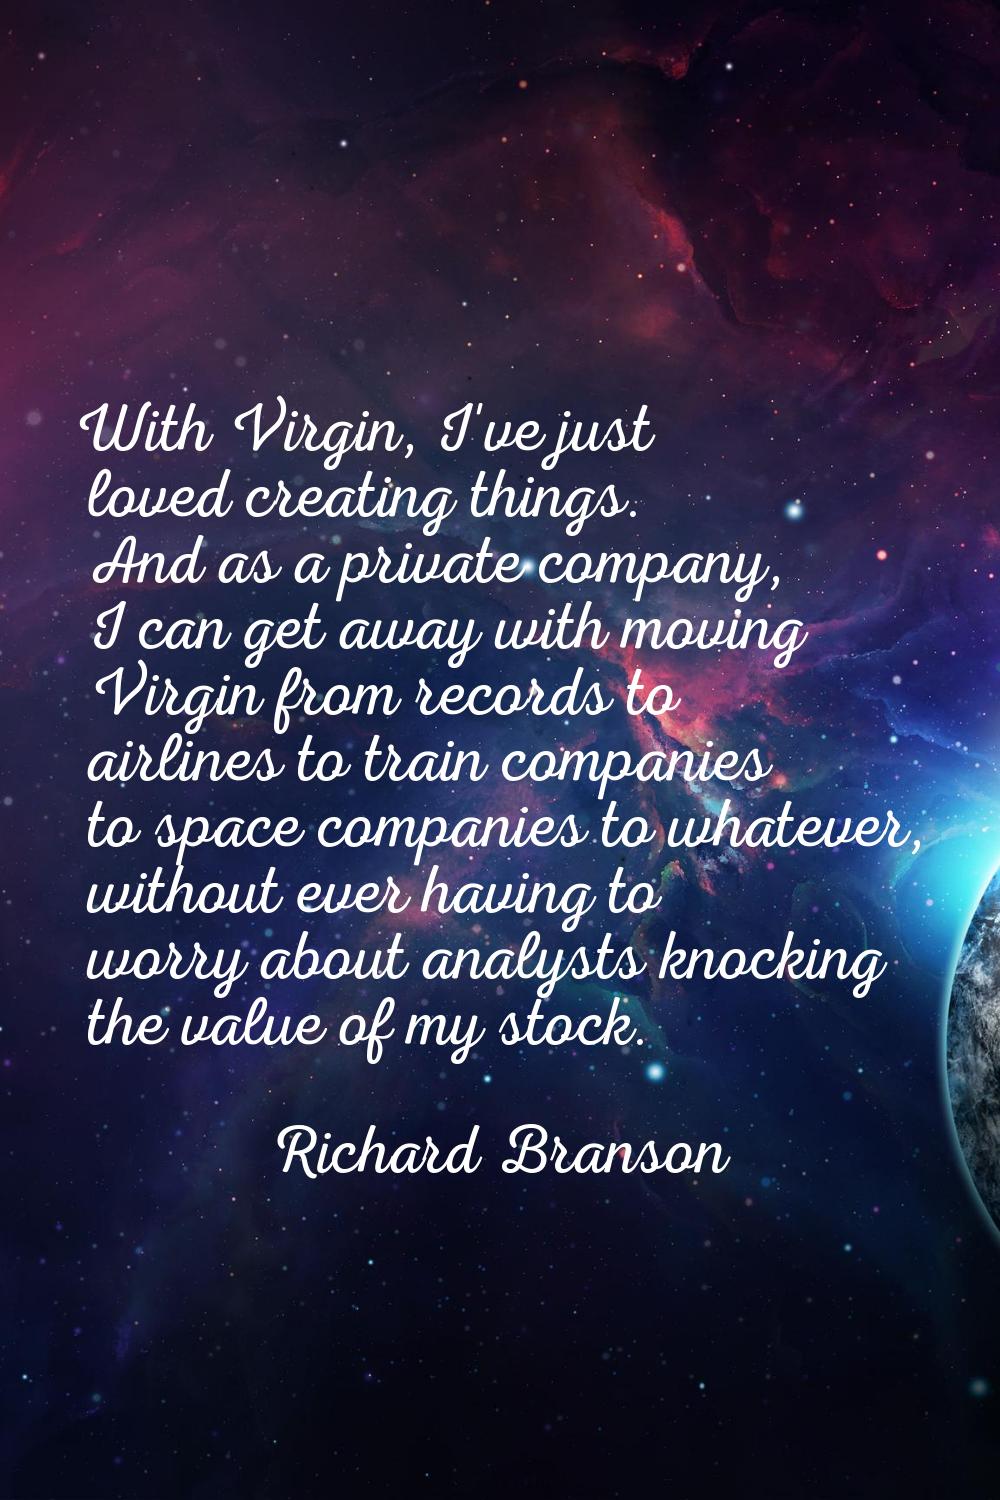 With Virgin, I've just loved creating things. And as a private company, I can get away with moving 